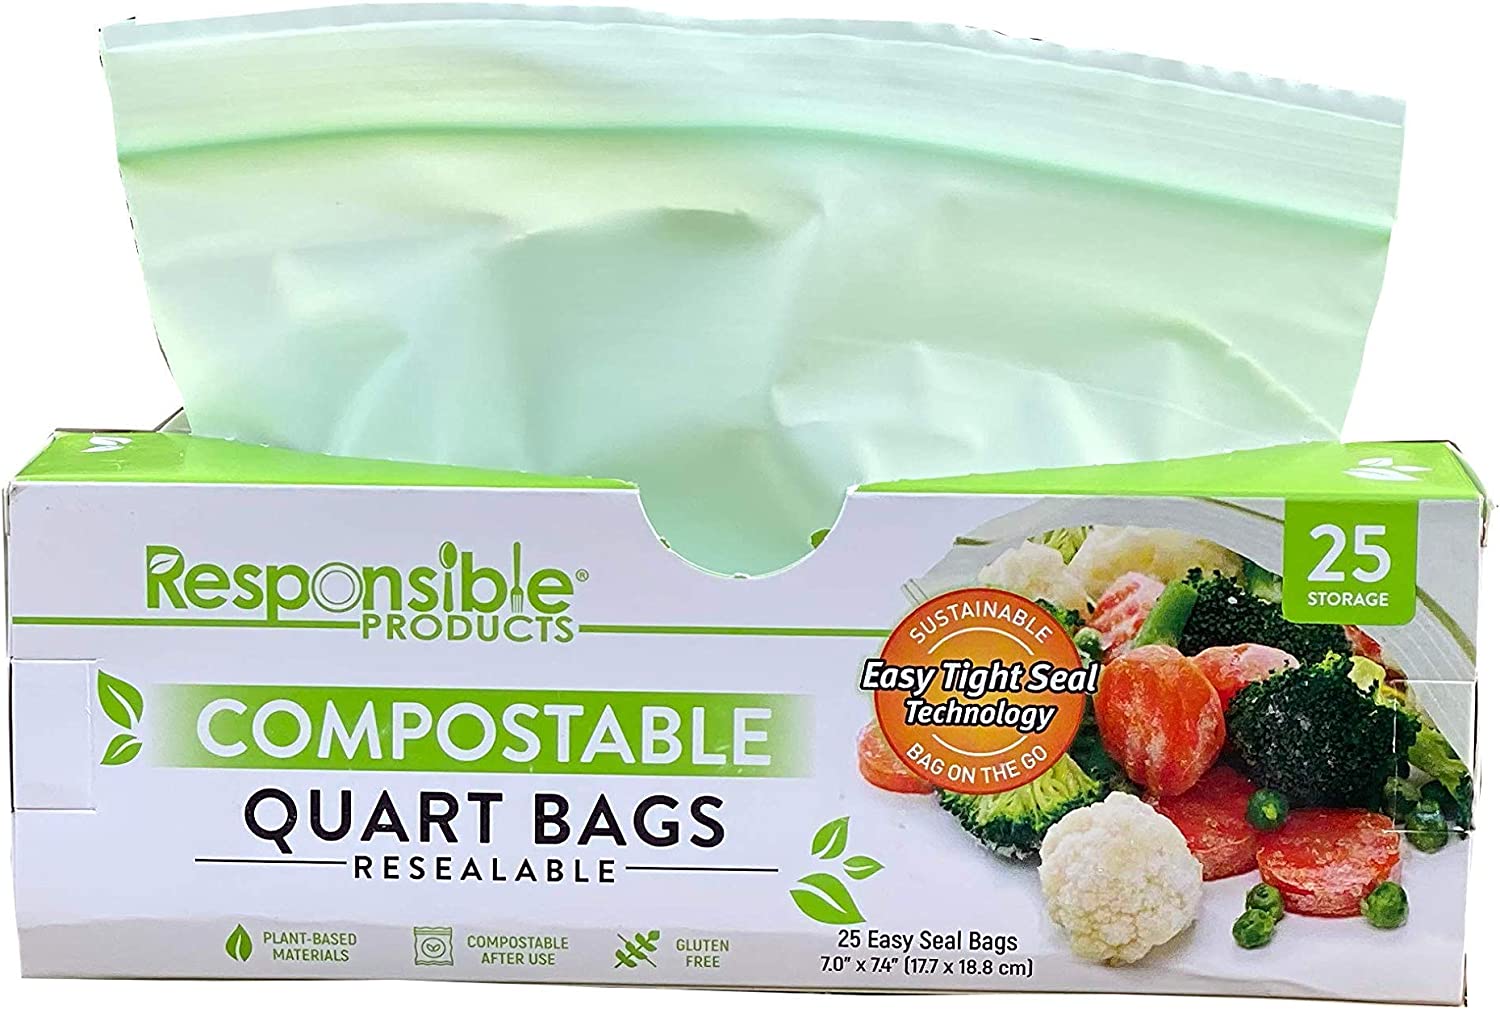 We found compostable, biodegradable sandwich bags that are eco-friendly